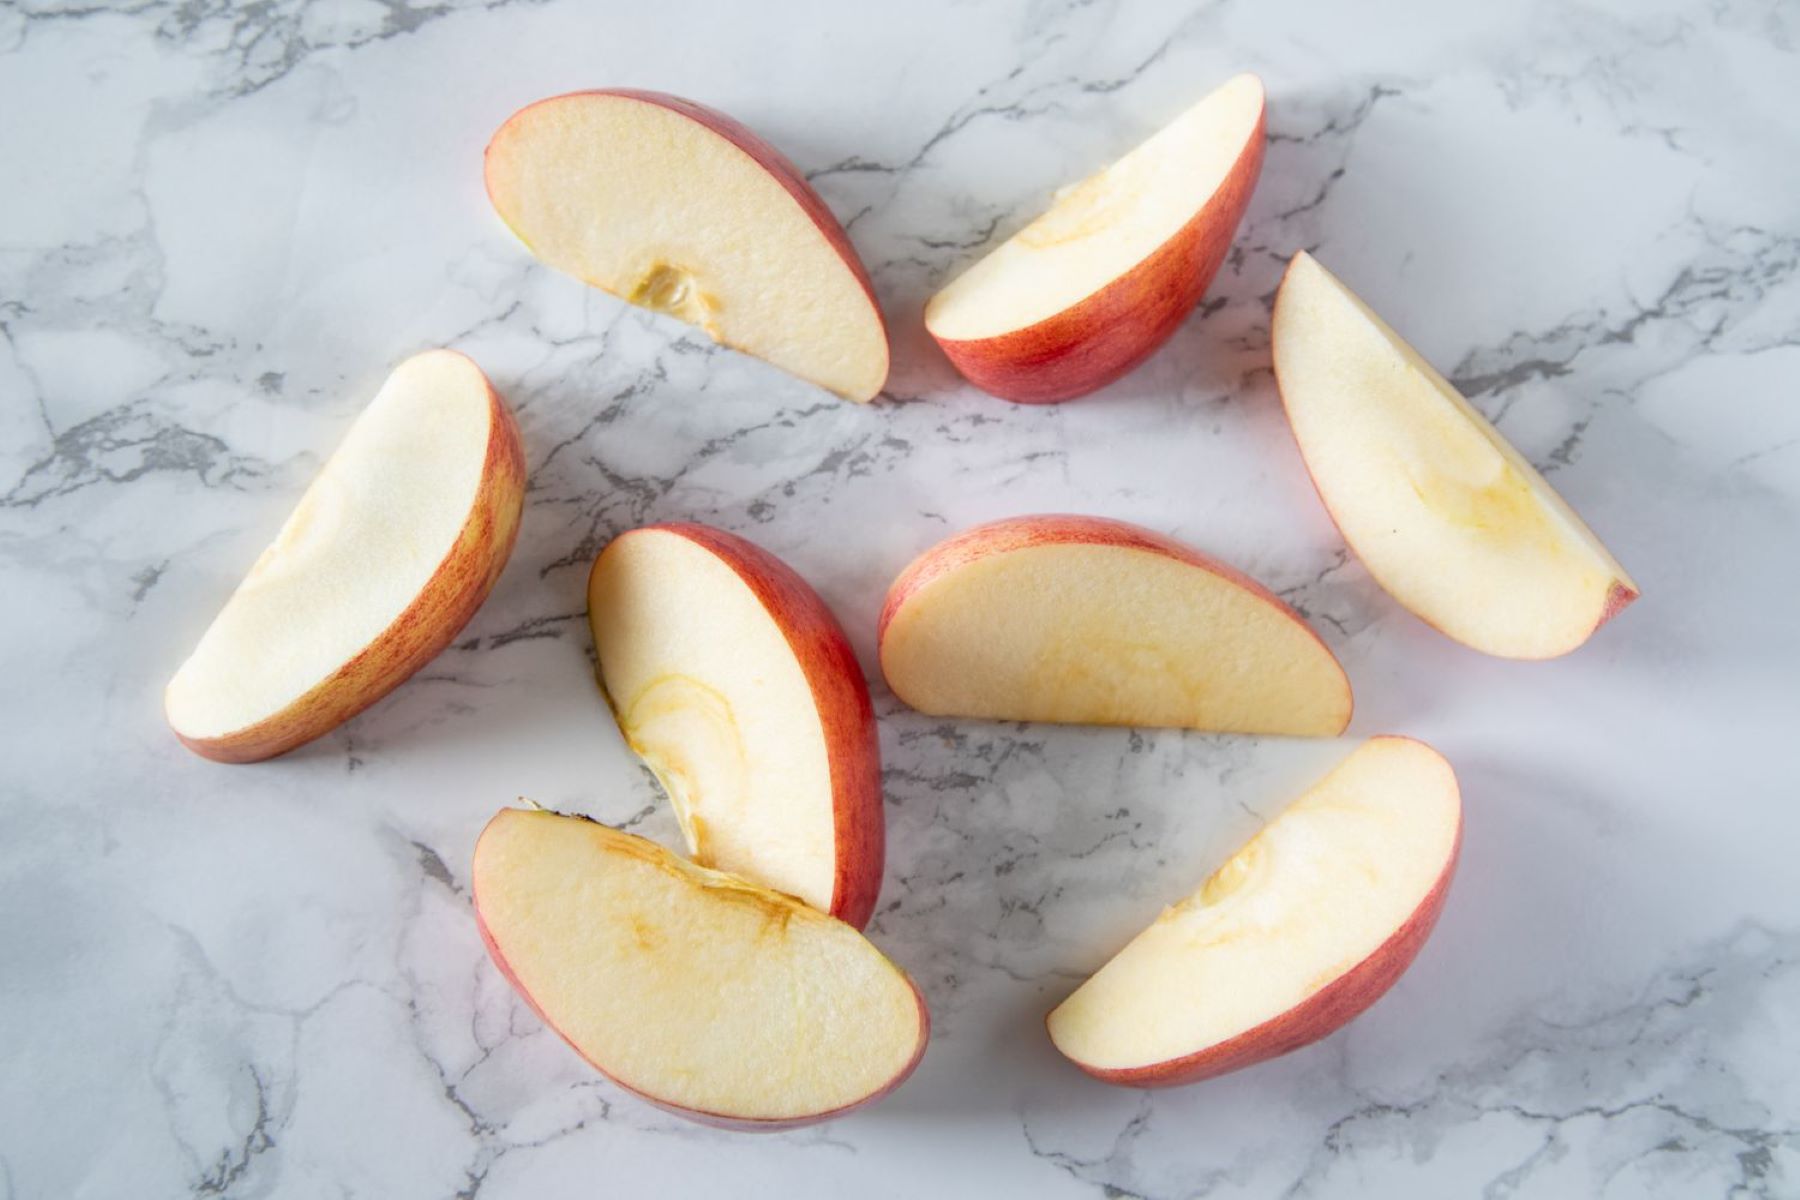 20-apple-slices-nutrition-facts